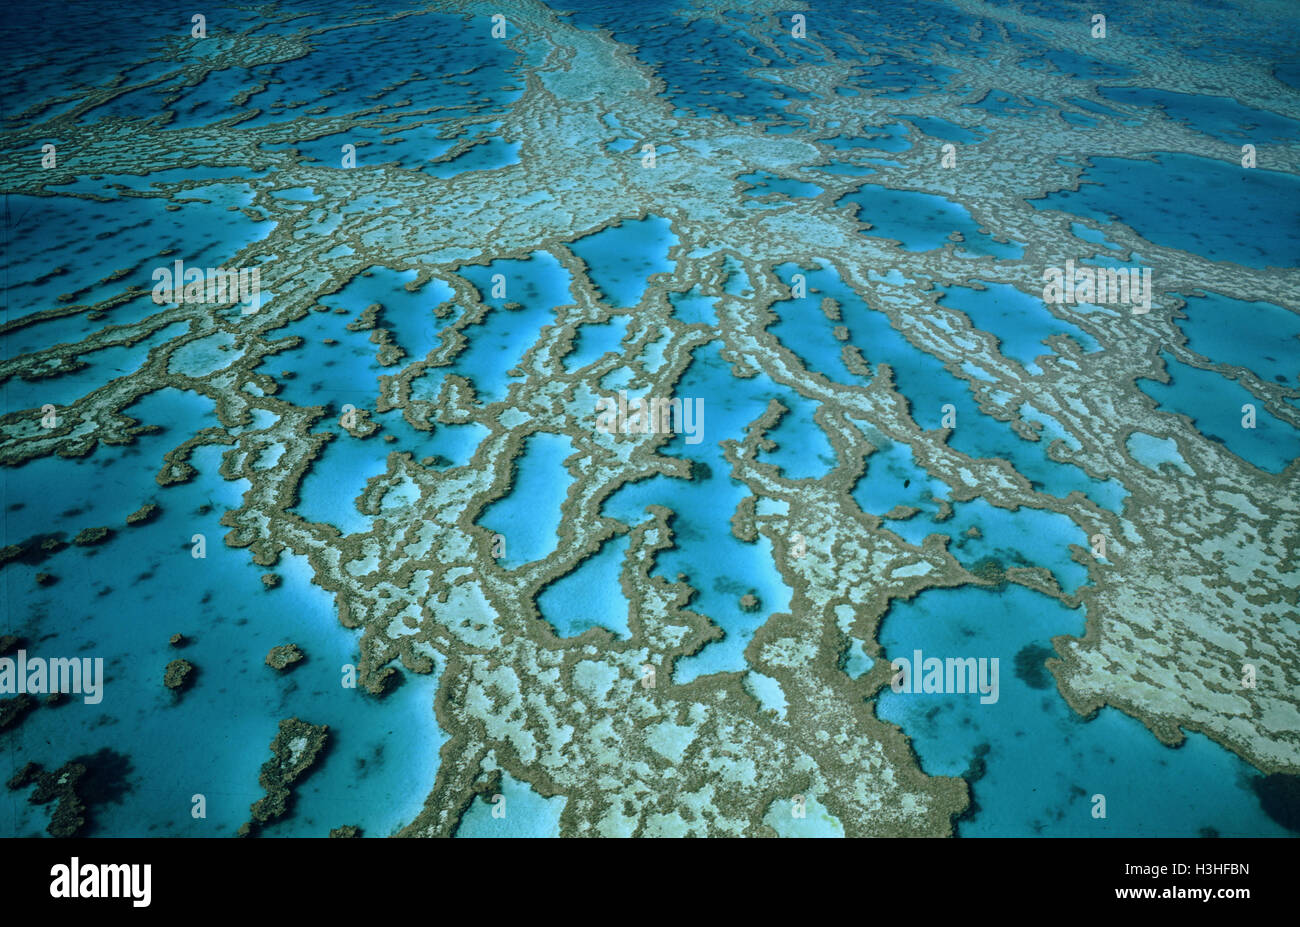 Hardy Reef and its coral formations Stock Photo